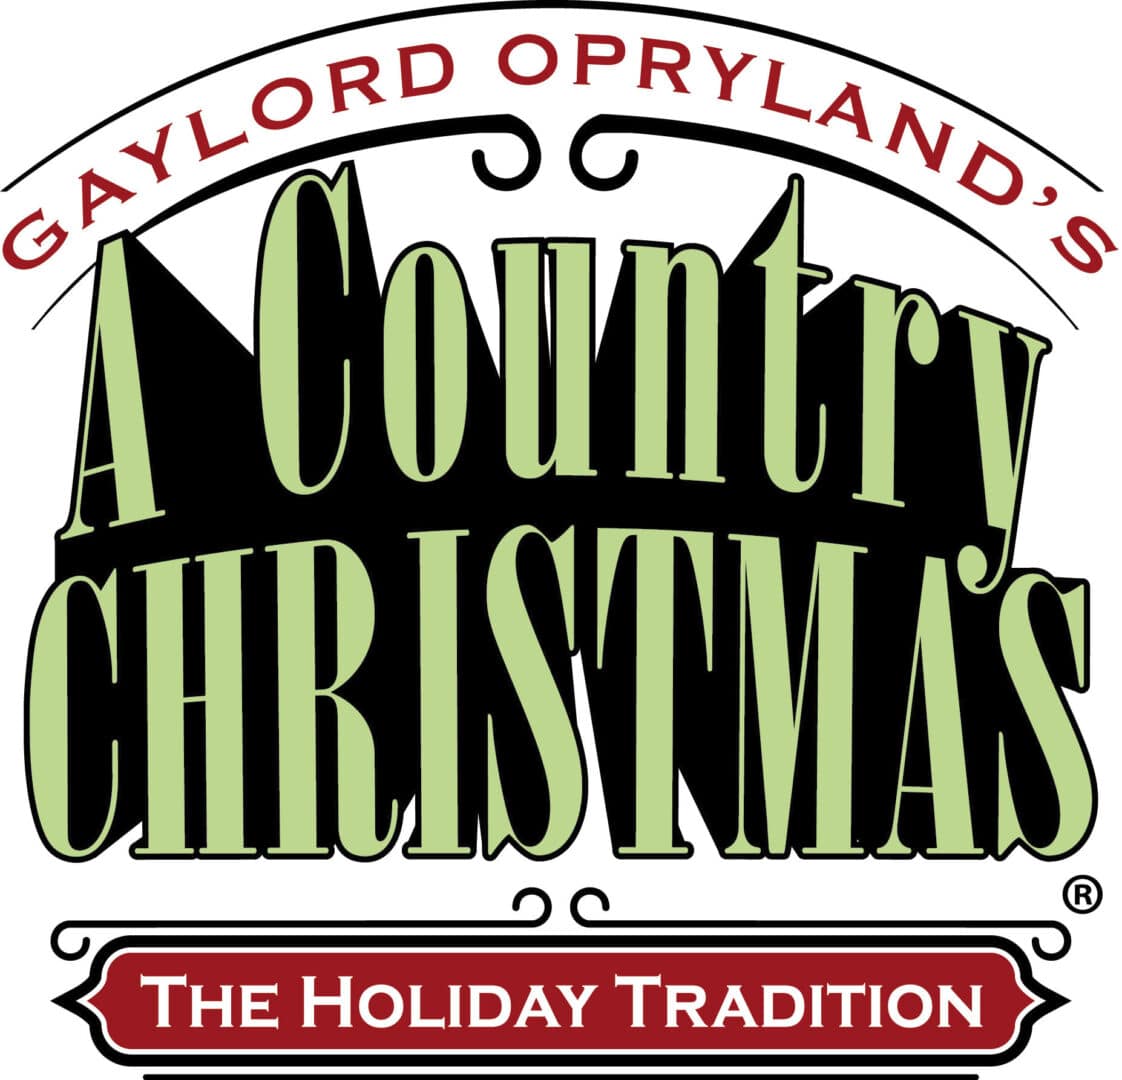 Gaylord Opryland's Christmas events in Nashville, Tennessee.